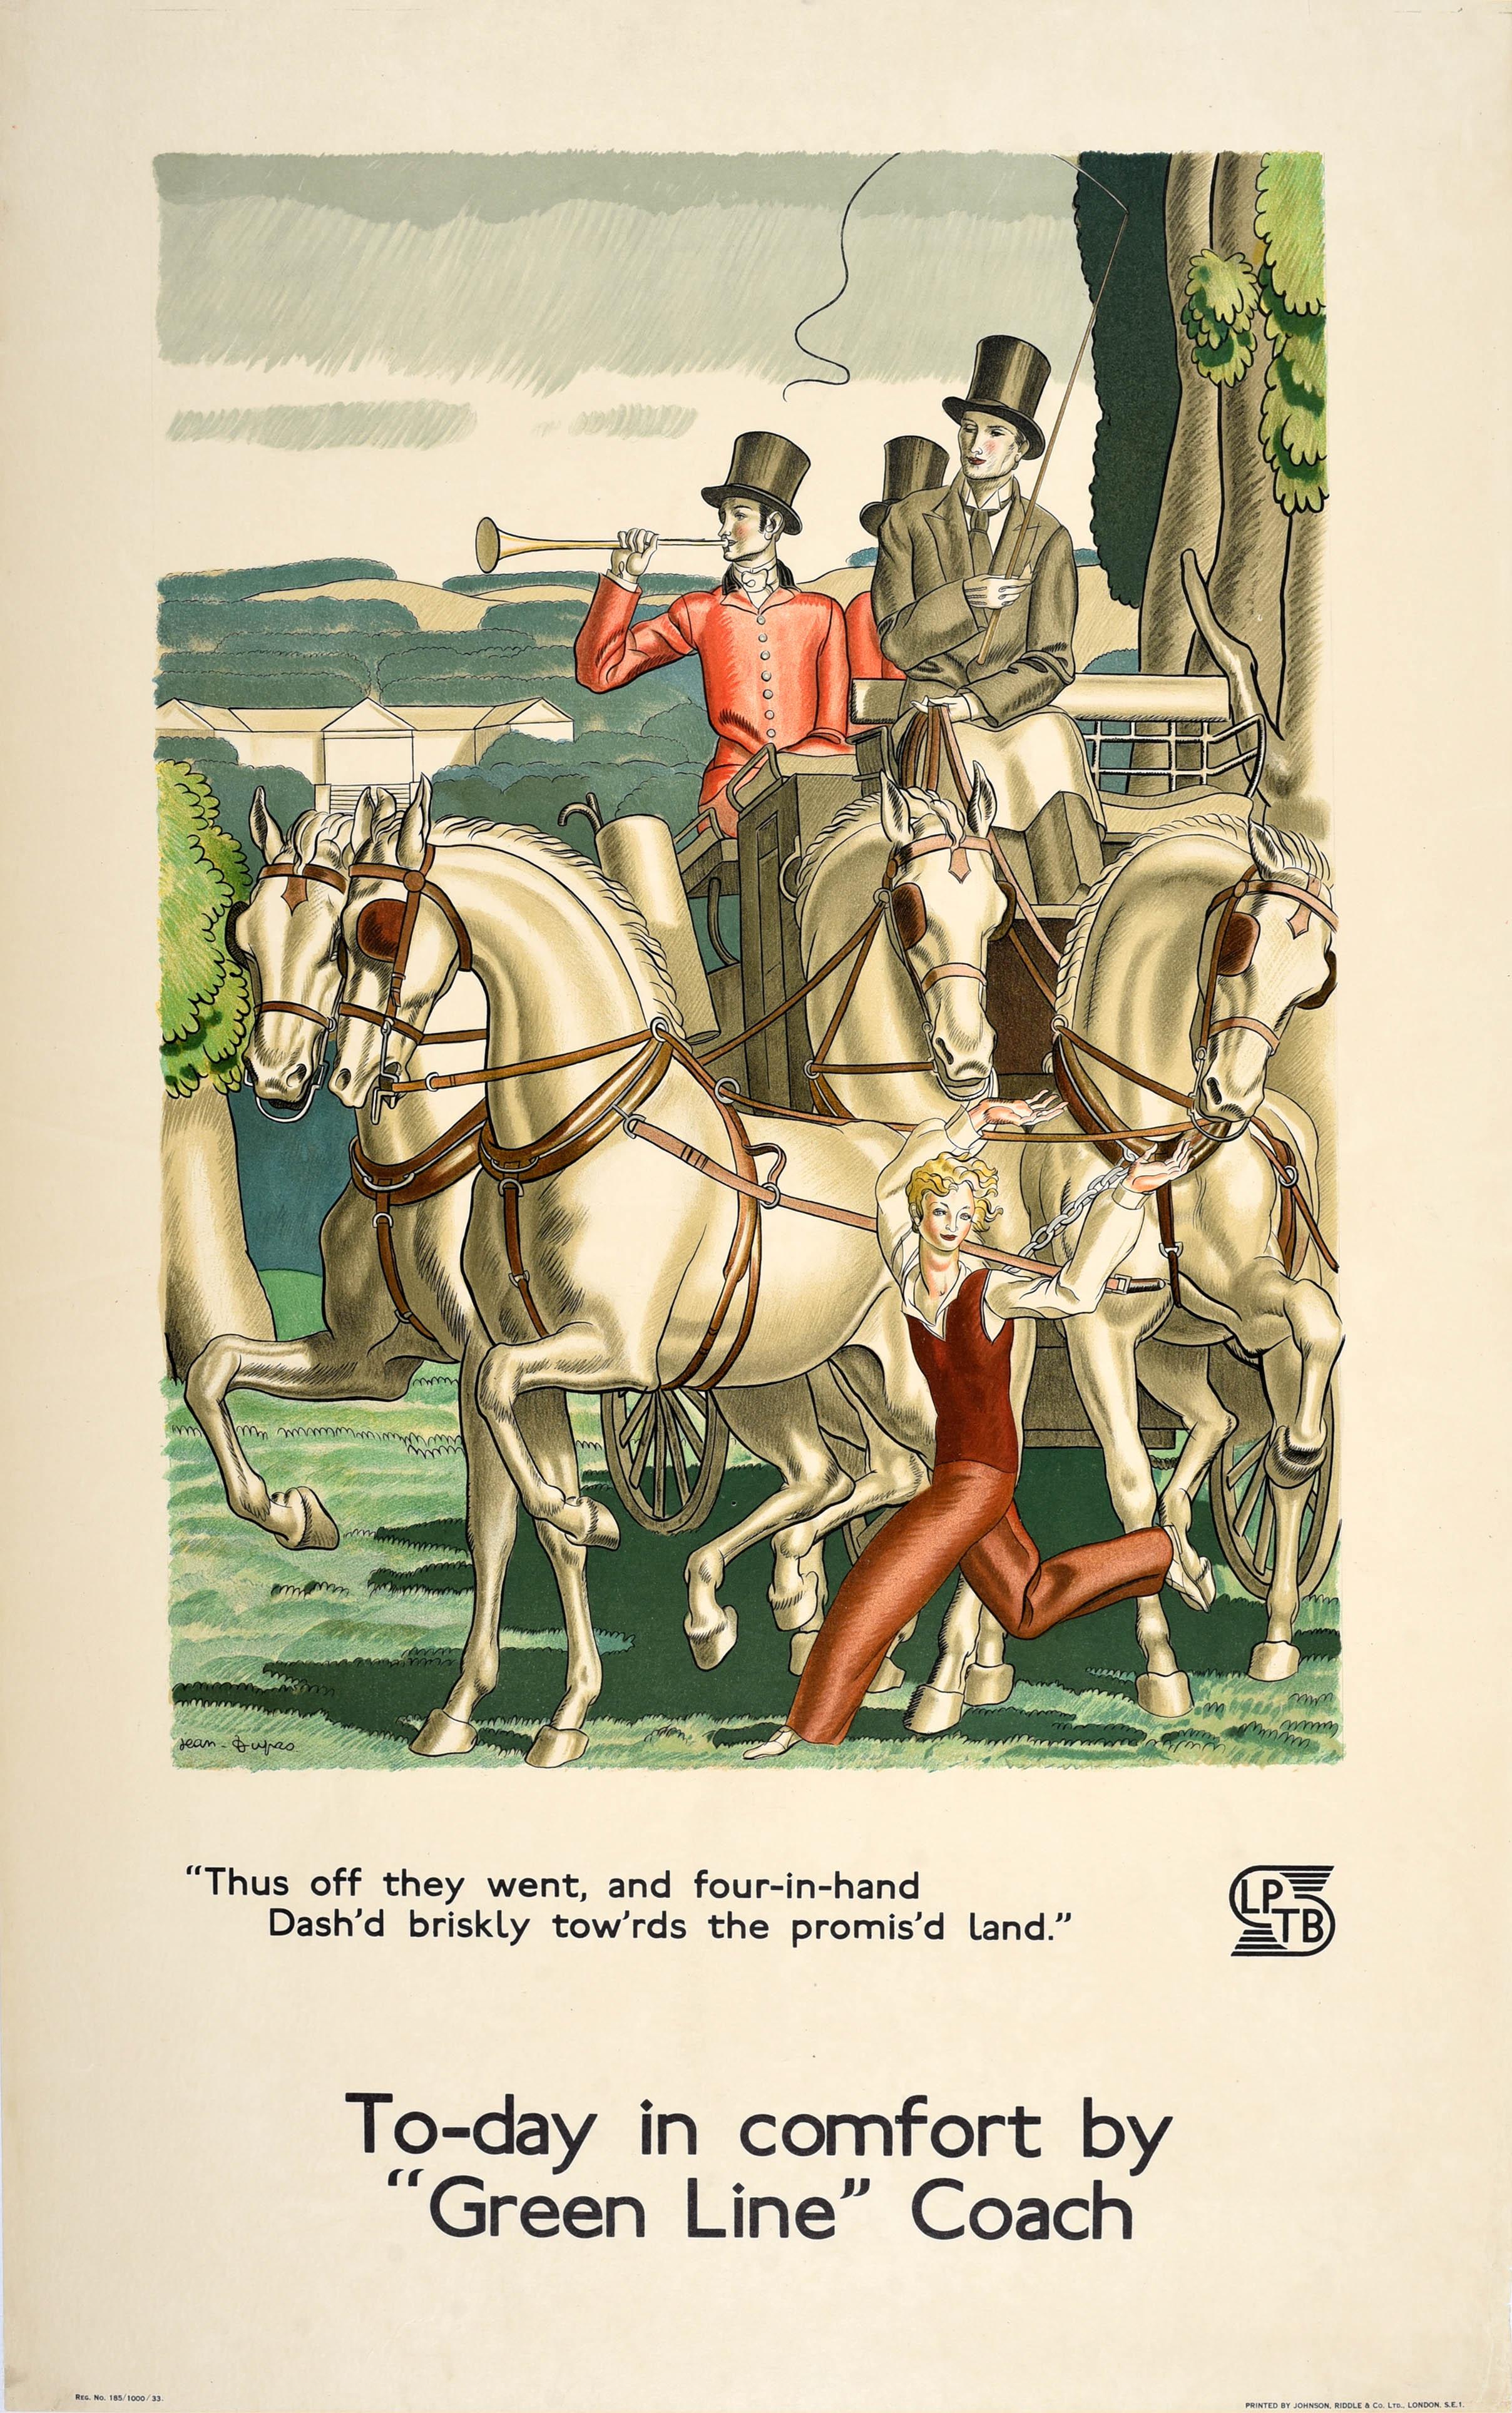 Original vintage London Transport poster promoting travel by Green Line Coach featuring stunning artwork by the notable French Art Deco designer Jean Dupas (1882-1964) depicting men in smart suits and top hats riding on a horse drawn carriage in the